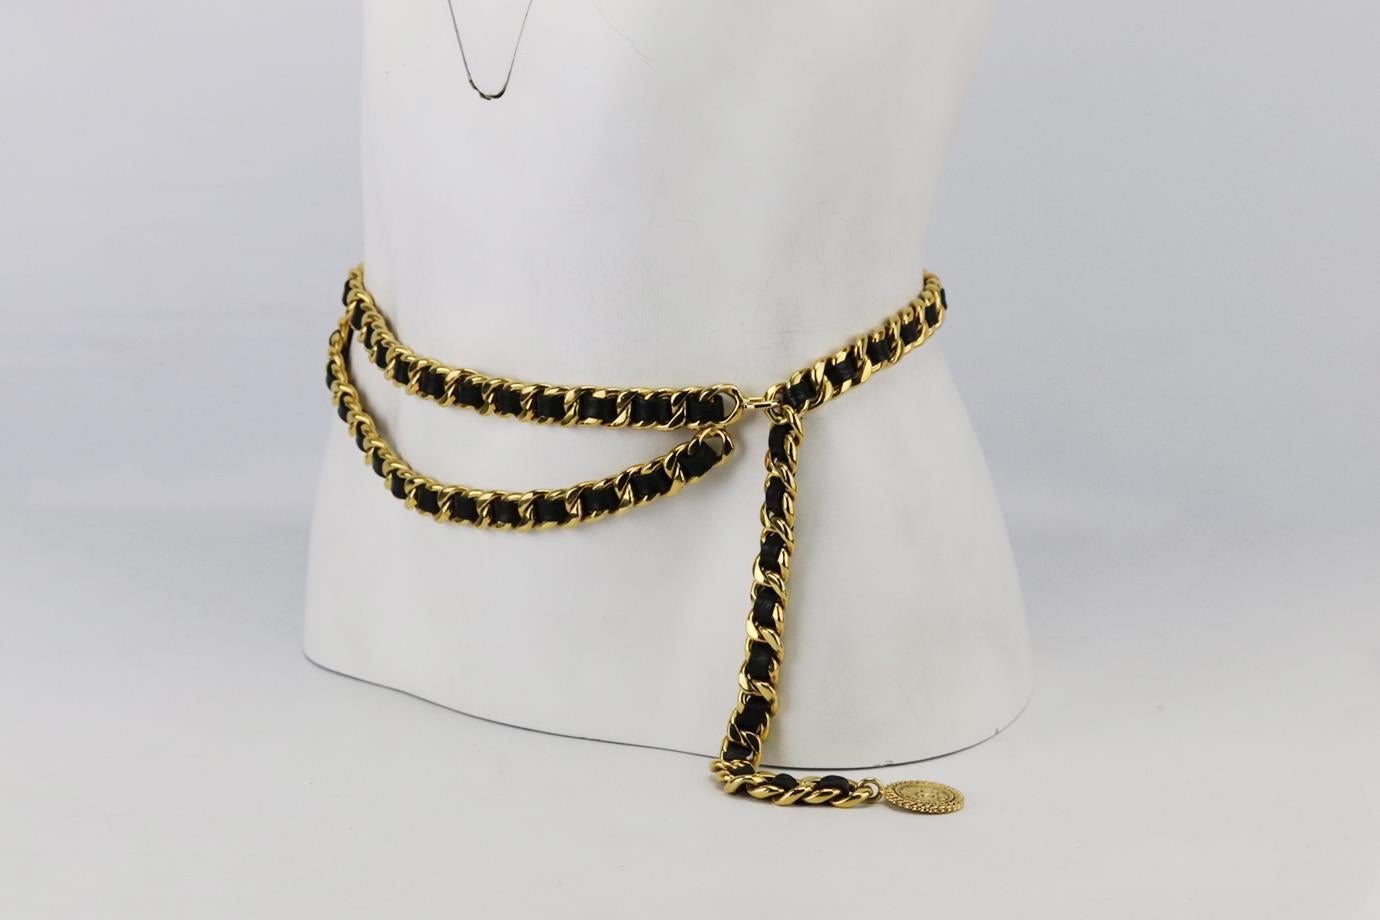 Chanel Vintage leather trimmed chain waist belt. Made from soft black leather interlocked with a gold-tone chain and finished with CC medallion. Black. Hook fastening at front. Length: 36.5 in. Width: 0.6 in